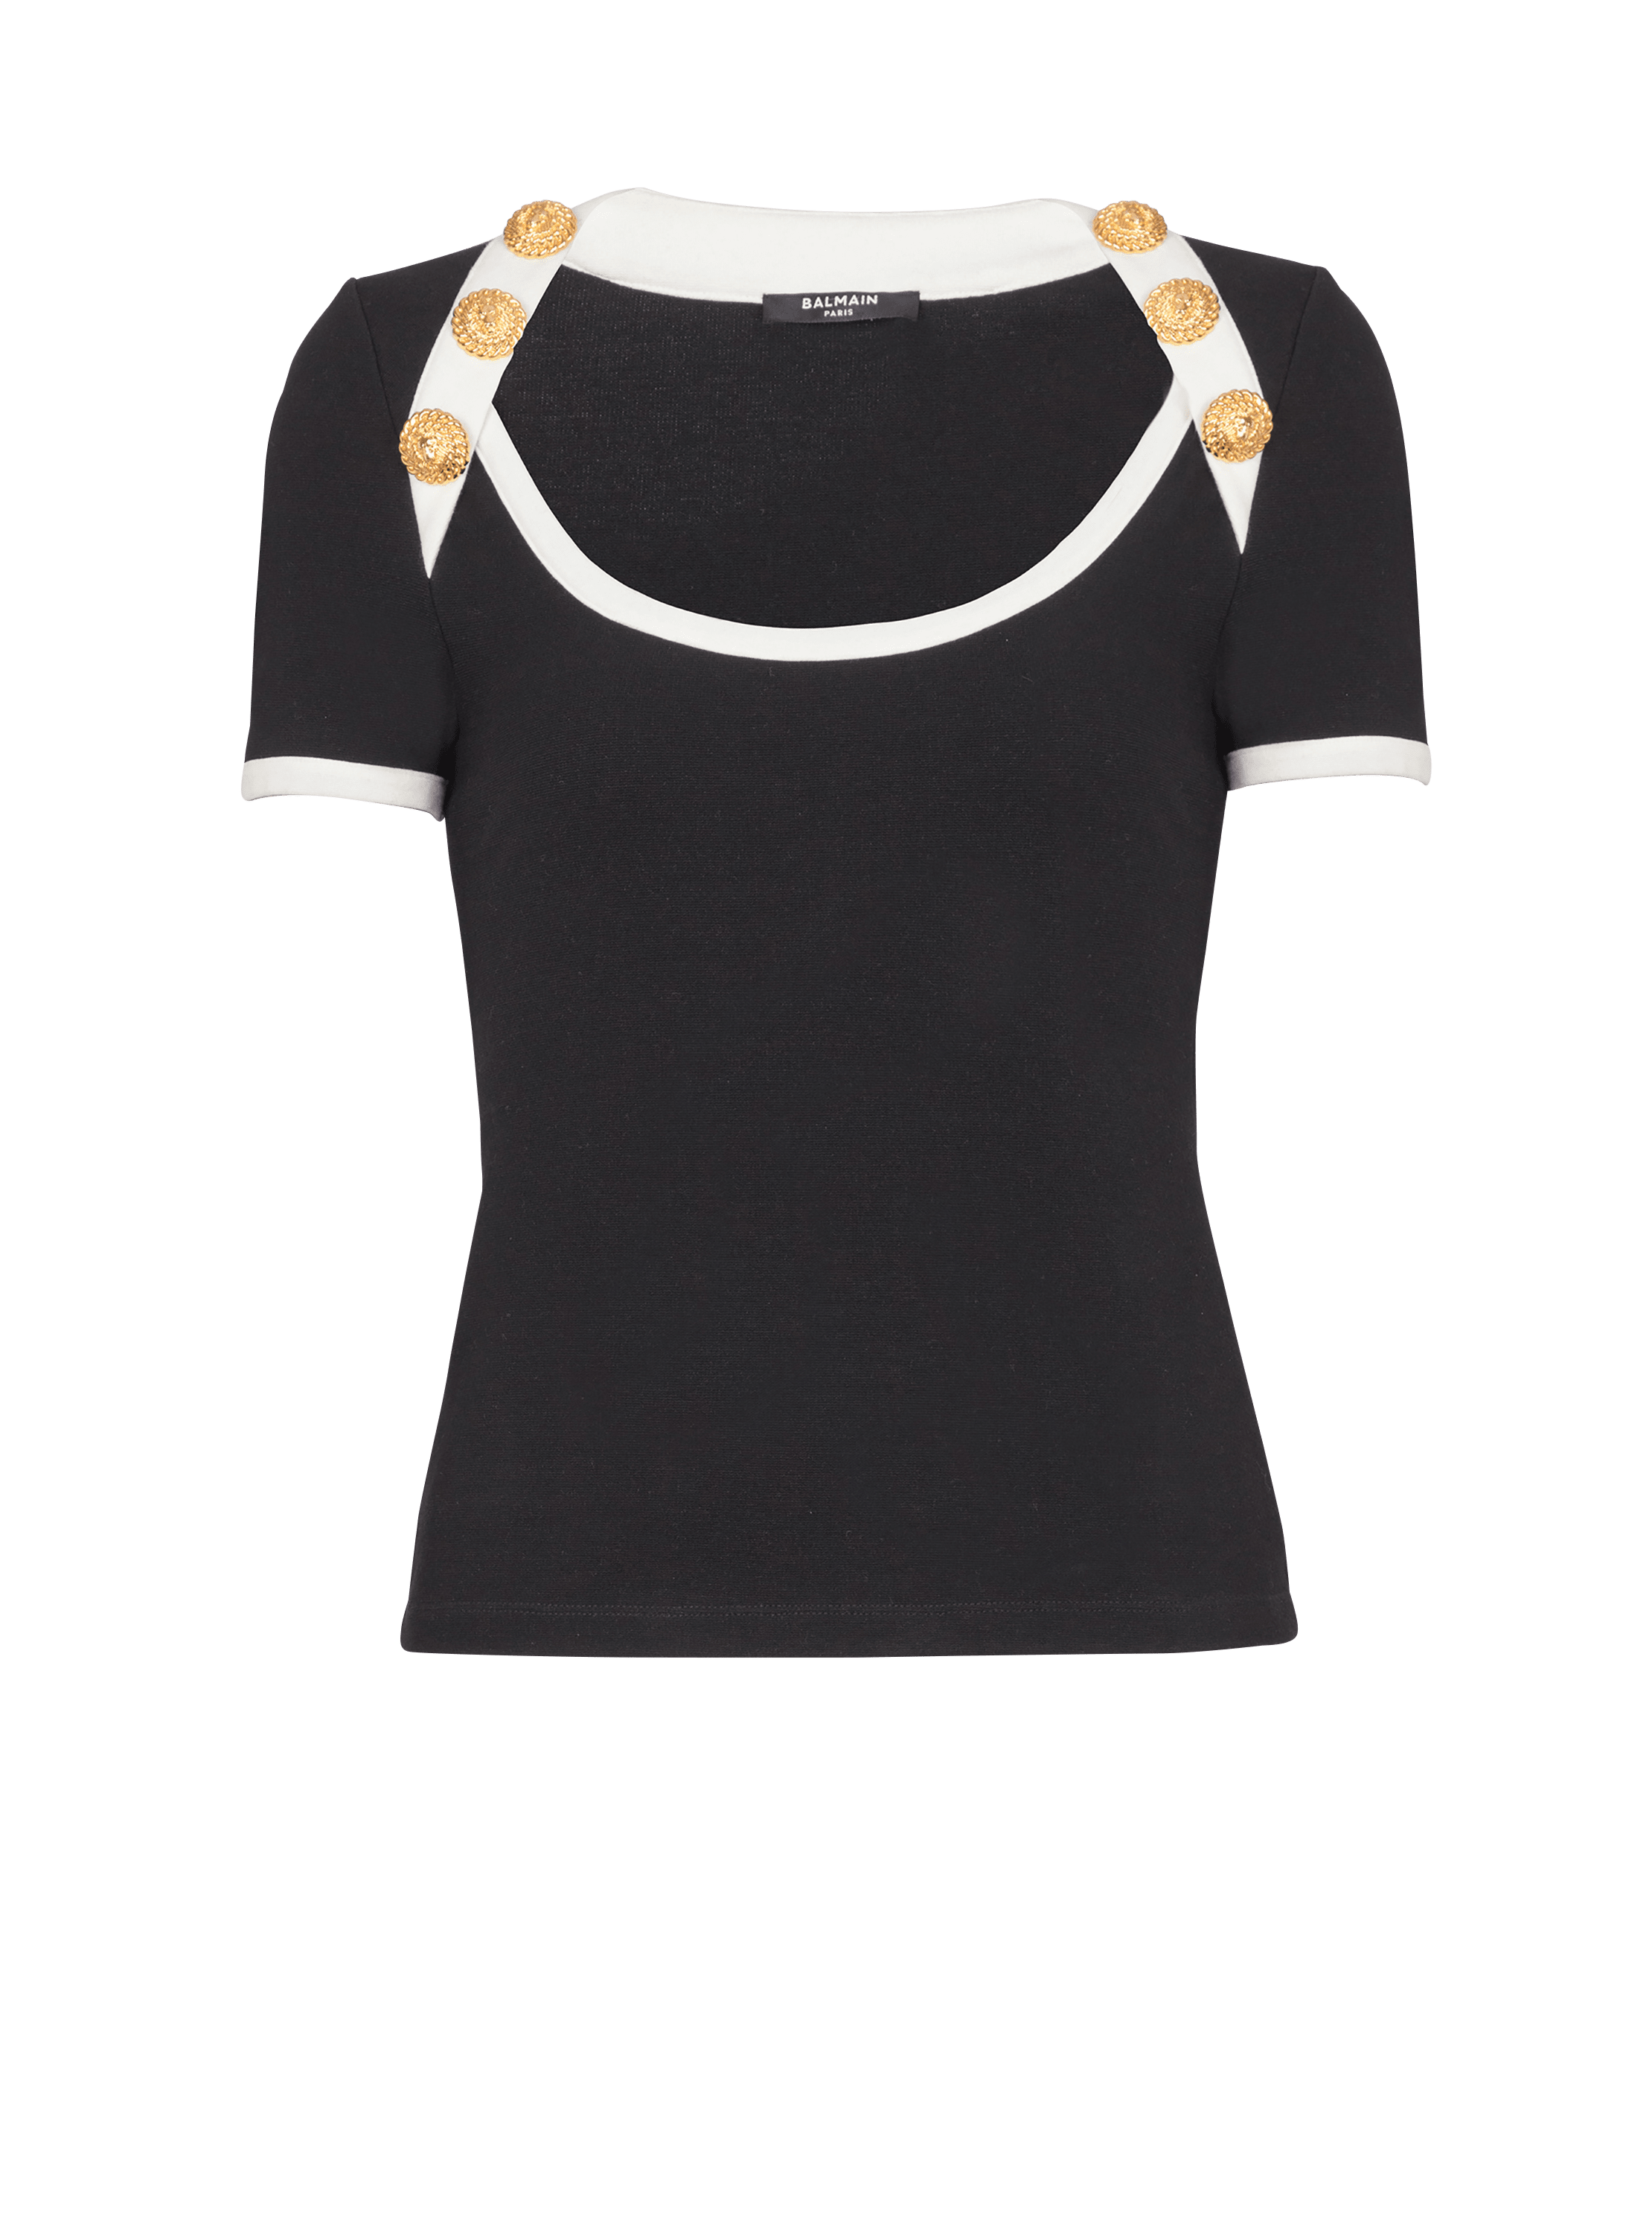 Two-tone T-shirt with button details